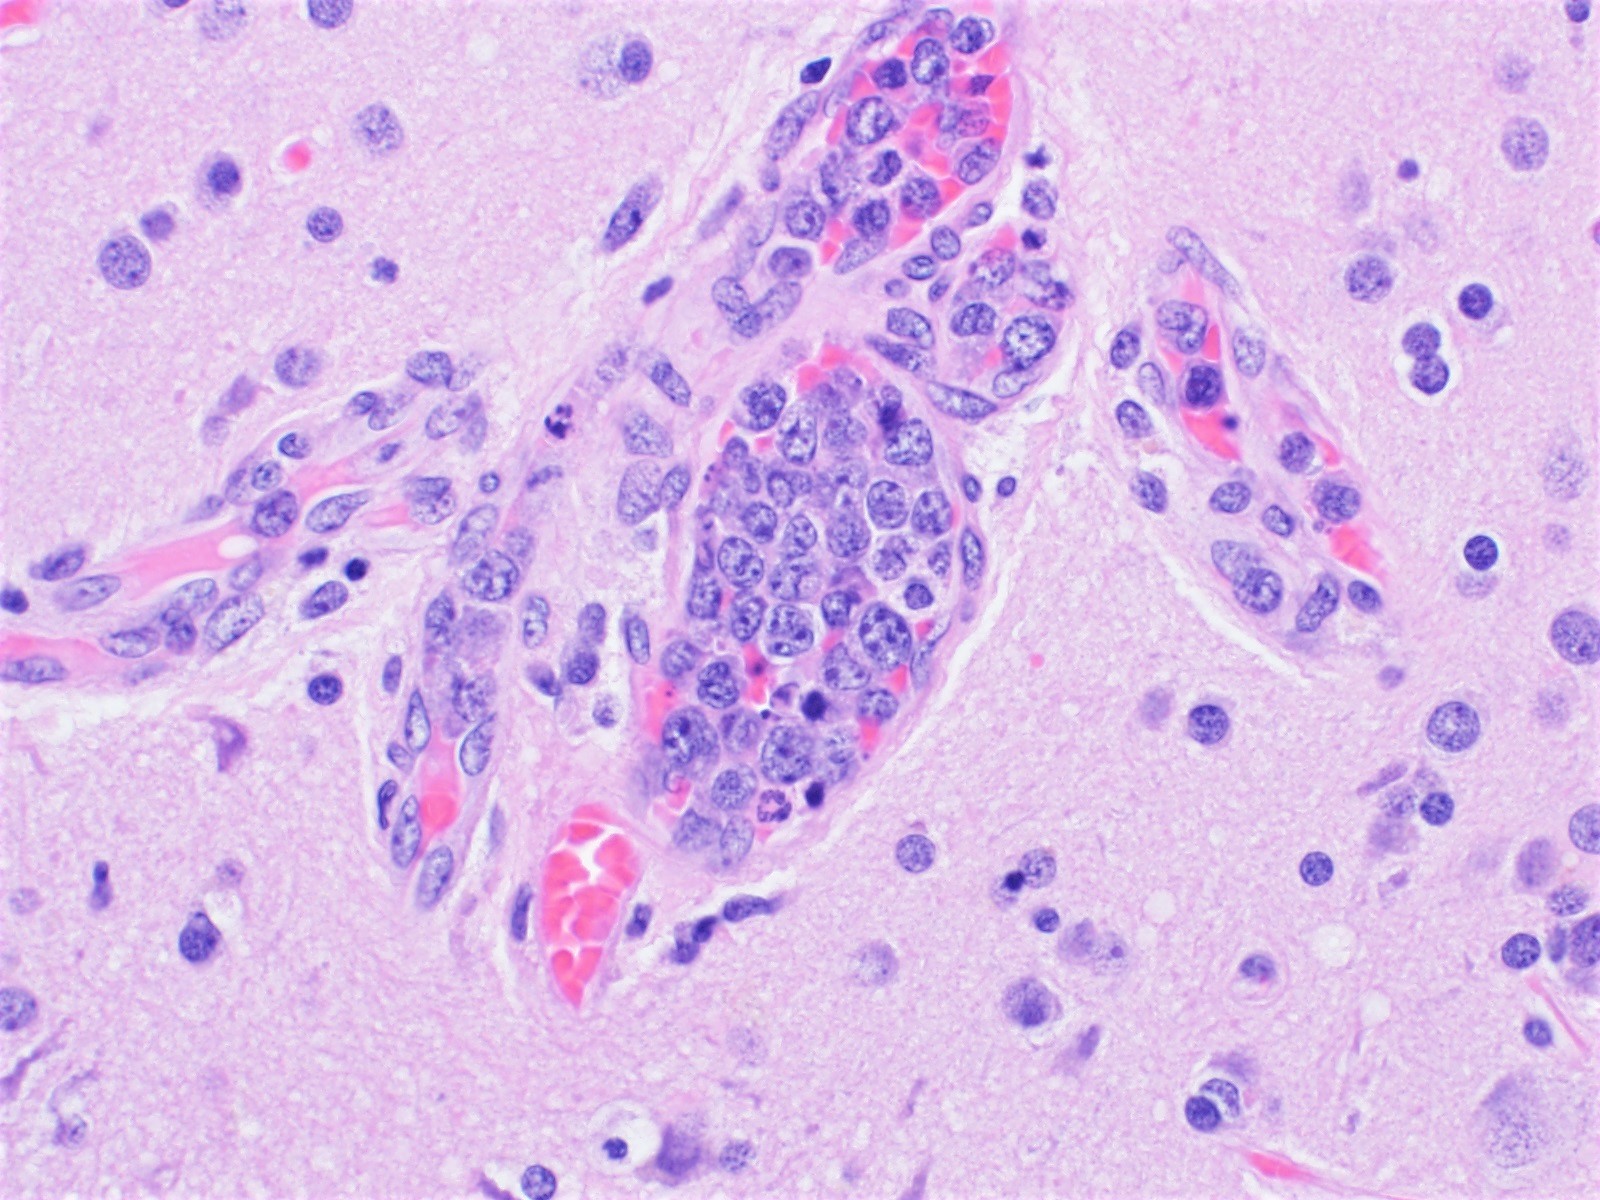 Large lymphoma cells in the vessels